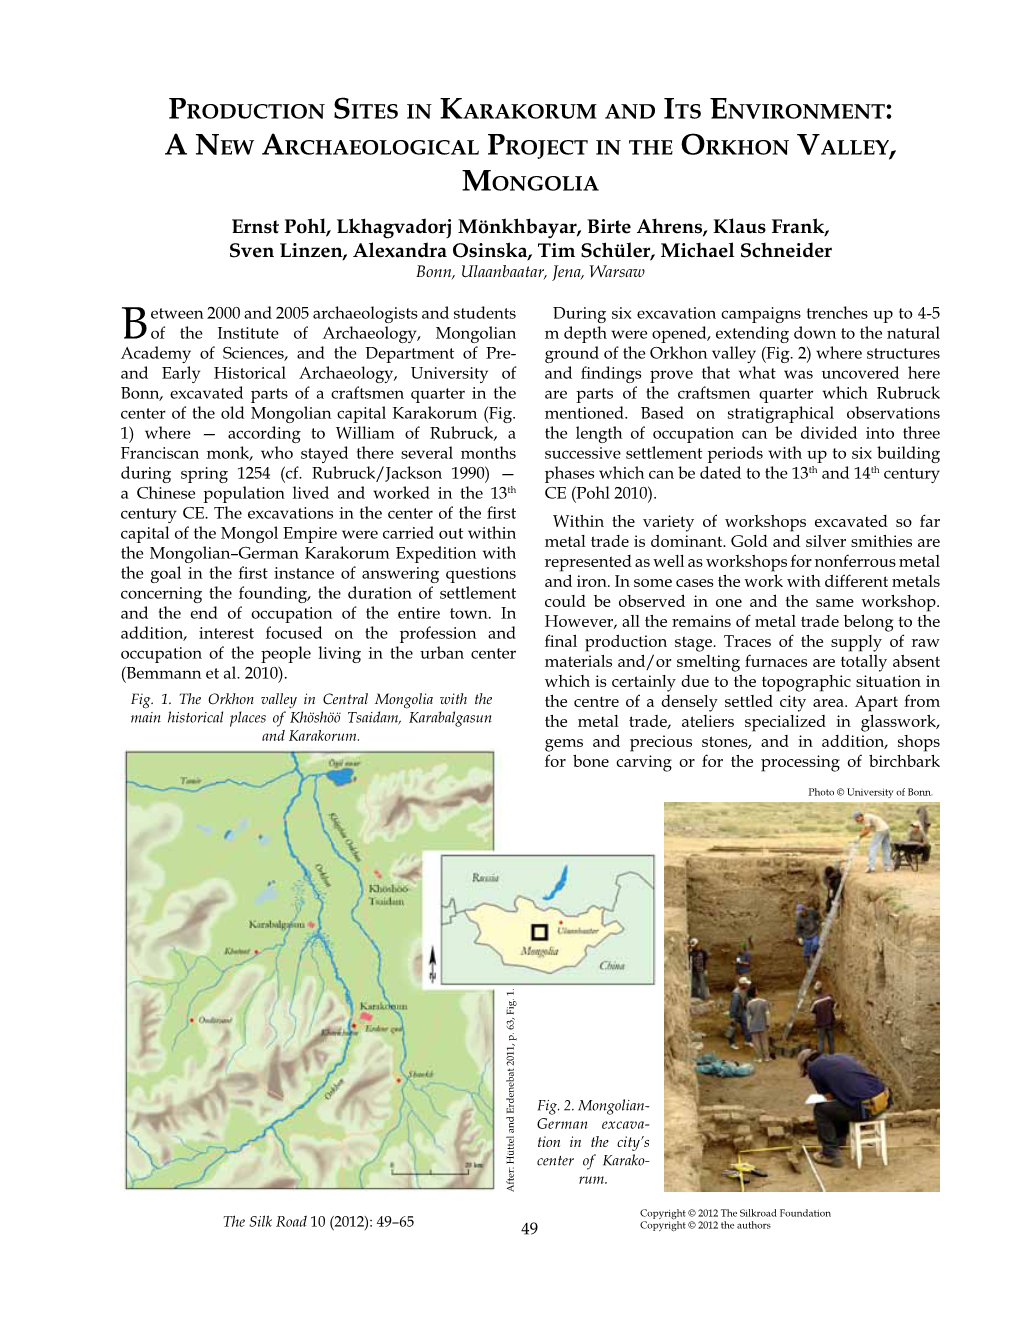 Anew Archaeological Project in the Orkhon Valley, Mongolia